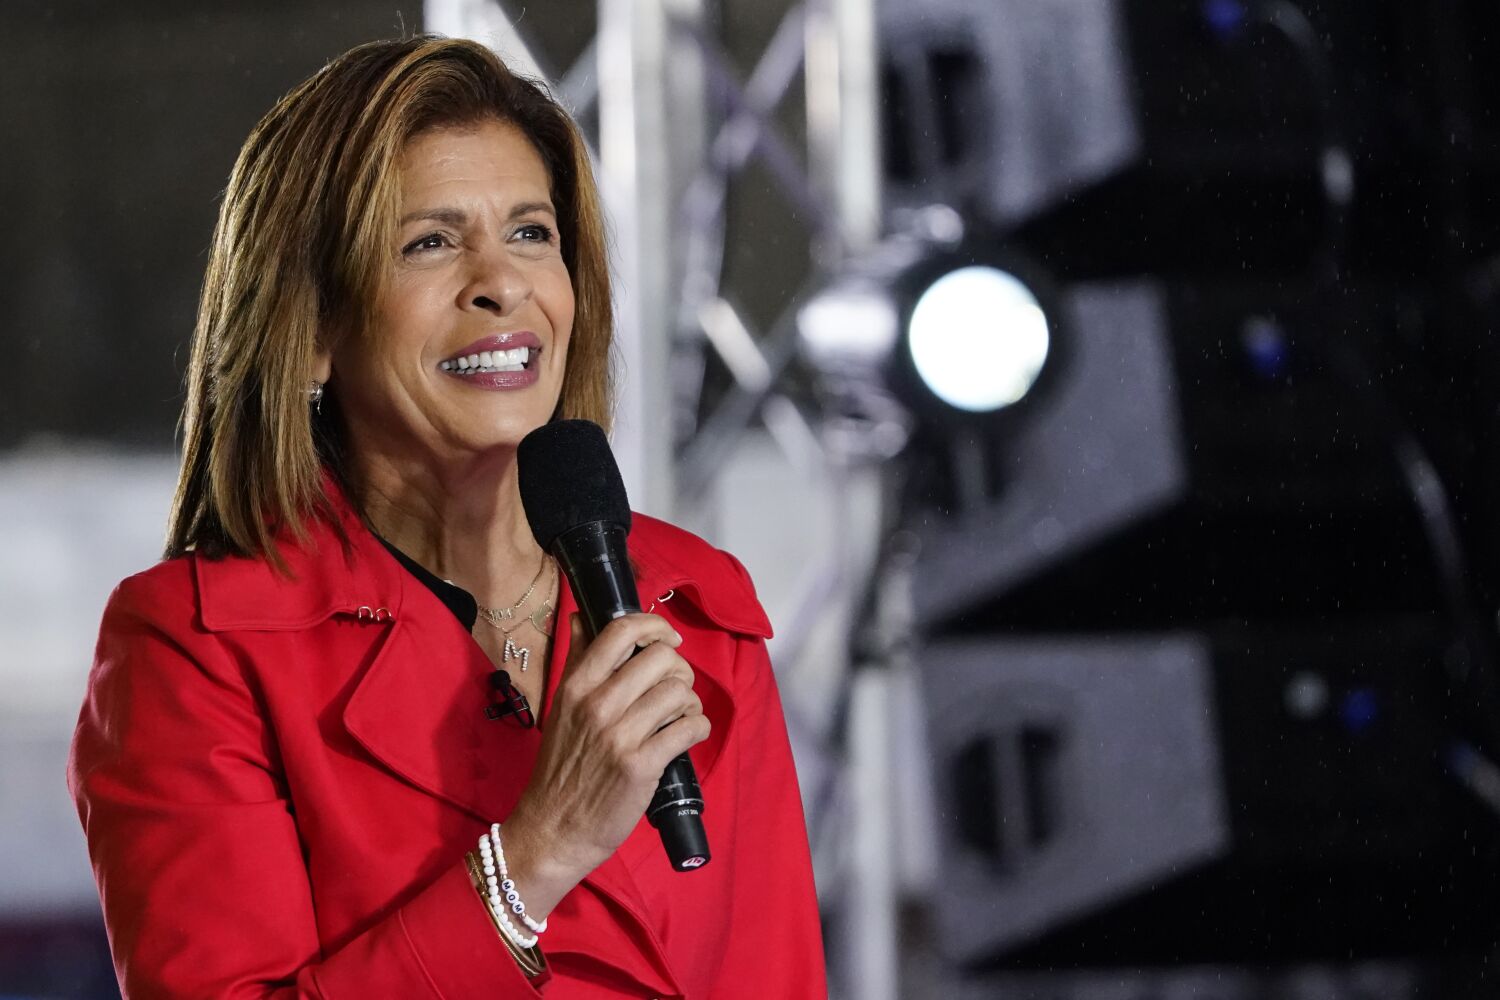 'Today' viewers express concern for Hoda Kotb amid prolonged, unexplained absence